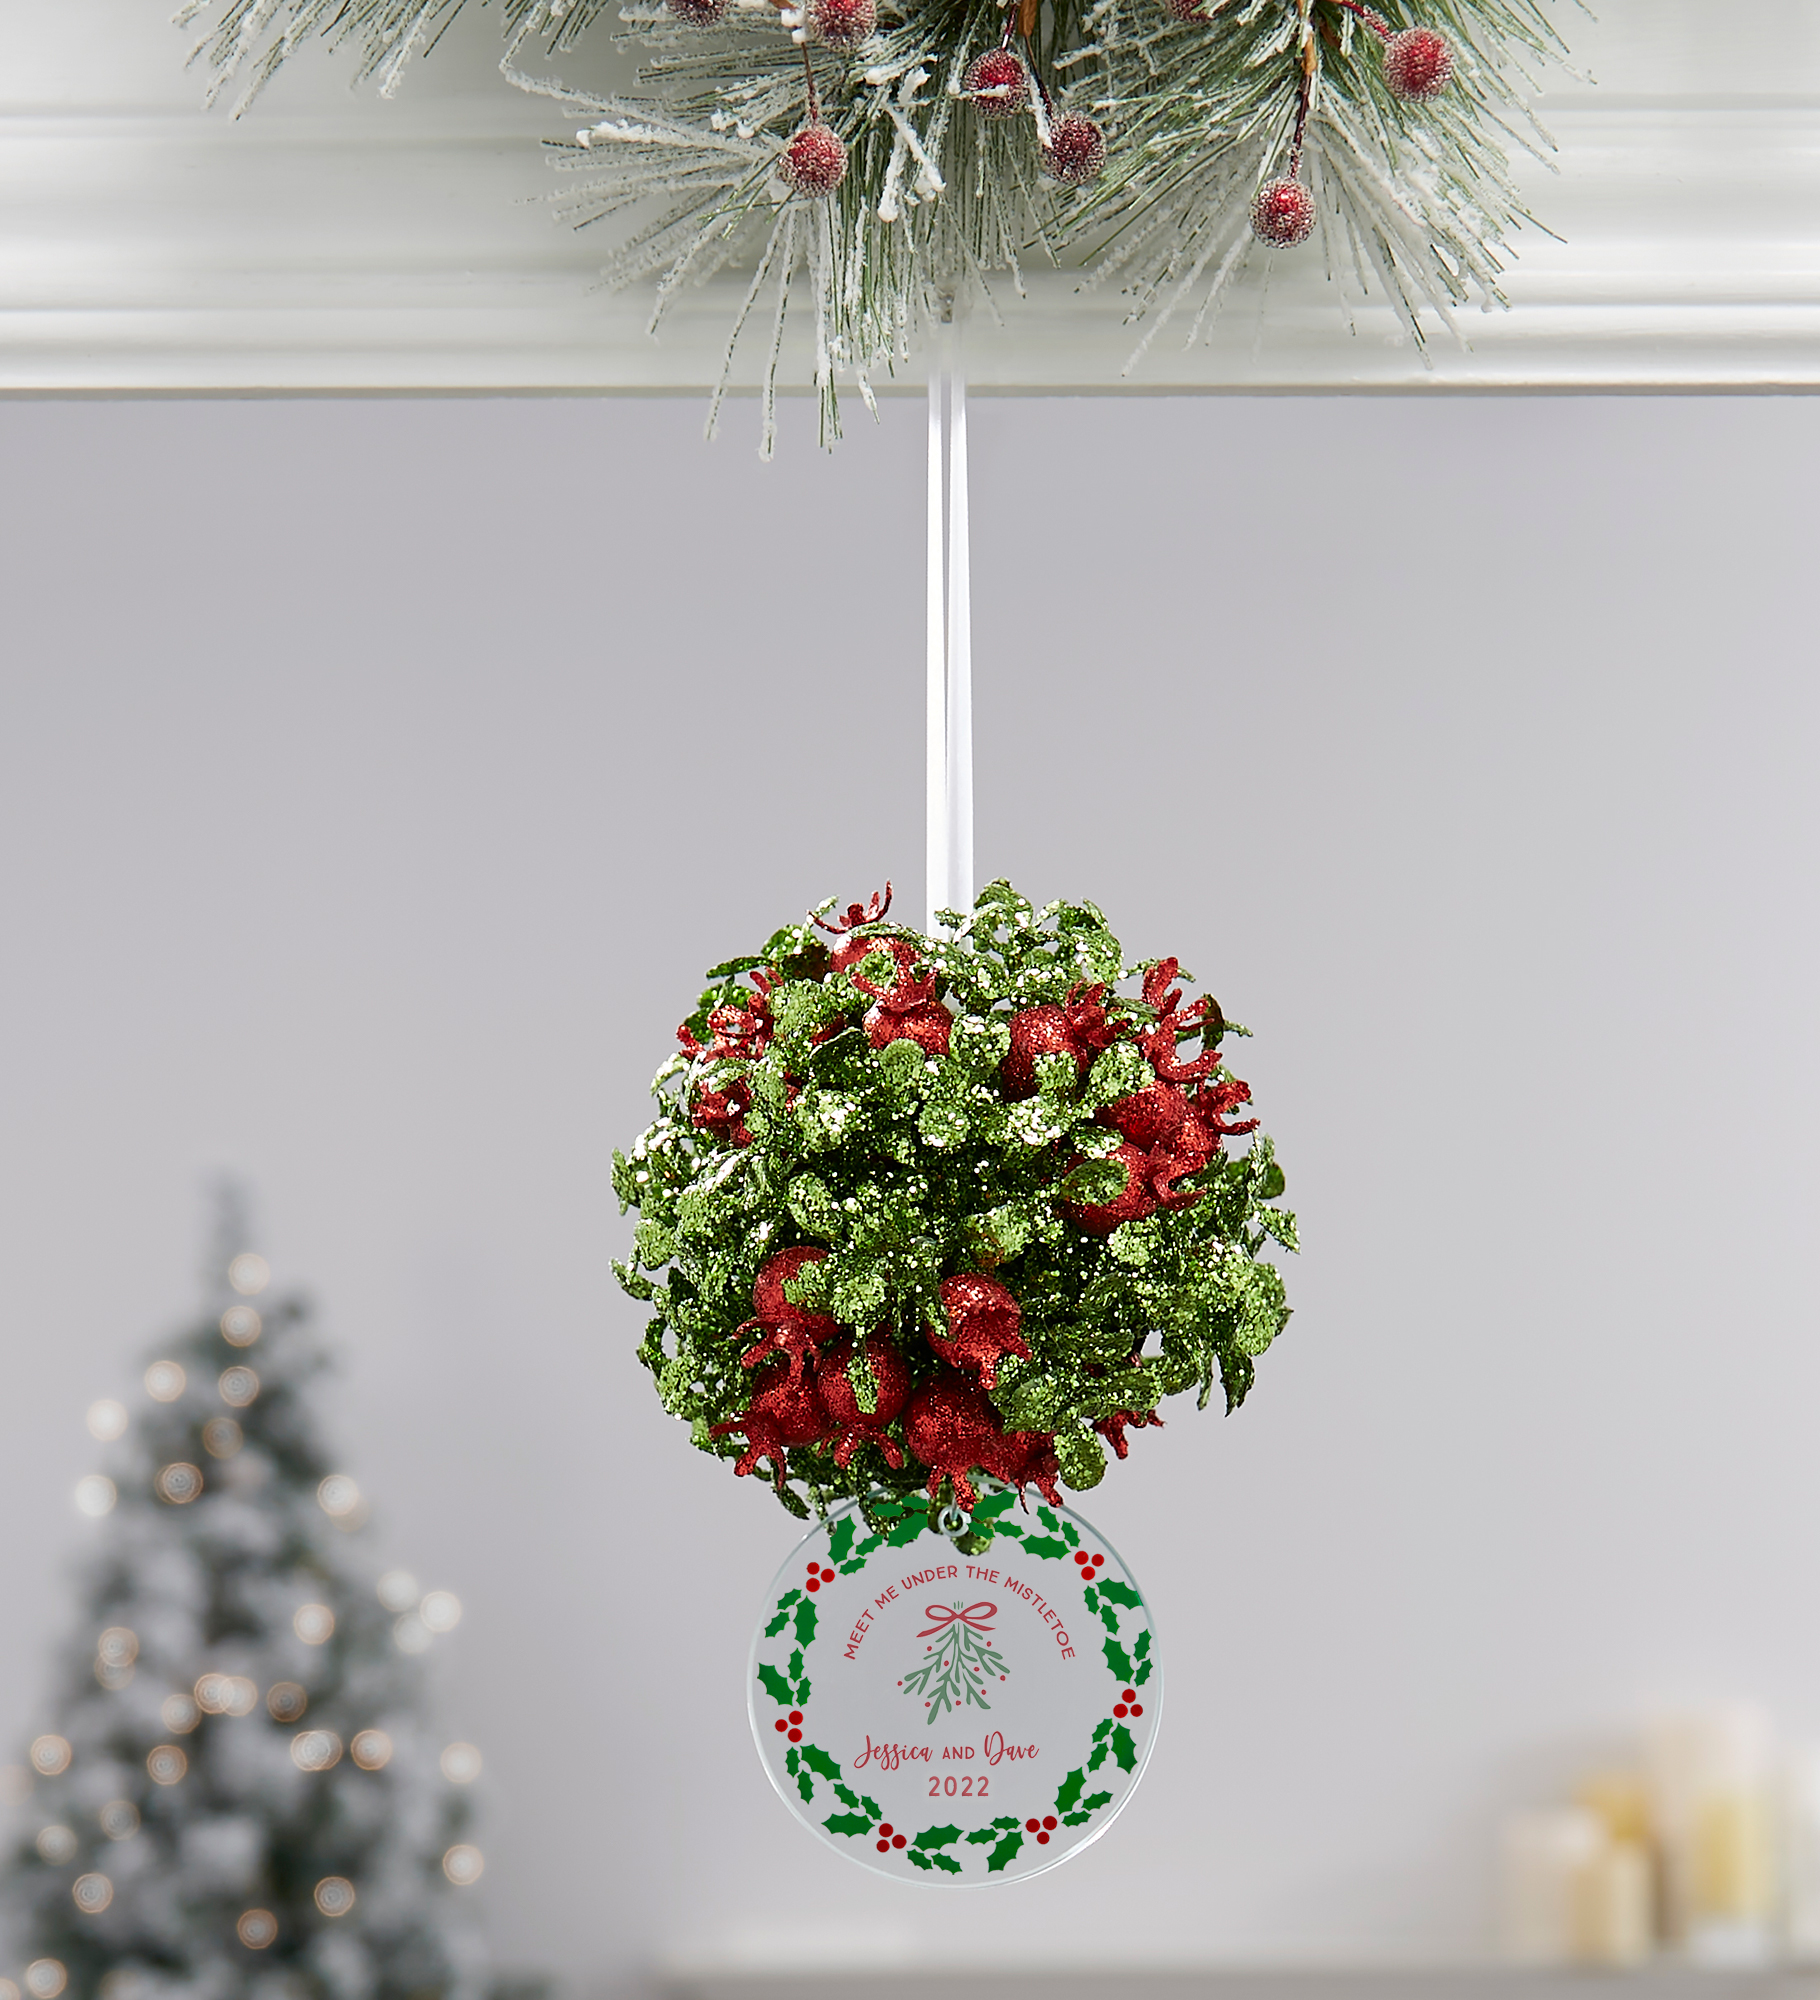 Meet Me Under The Mistletoe Holly Berry Glass Personalized Ornament